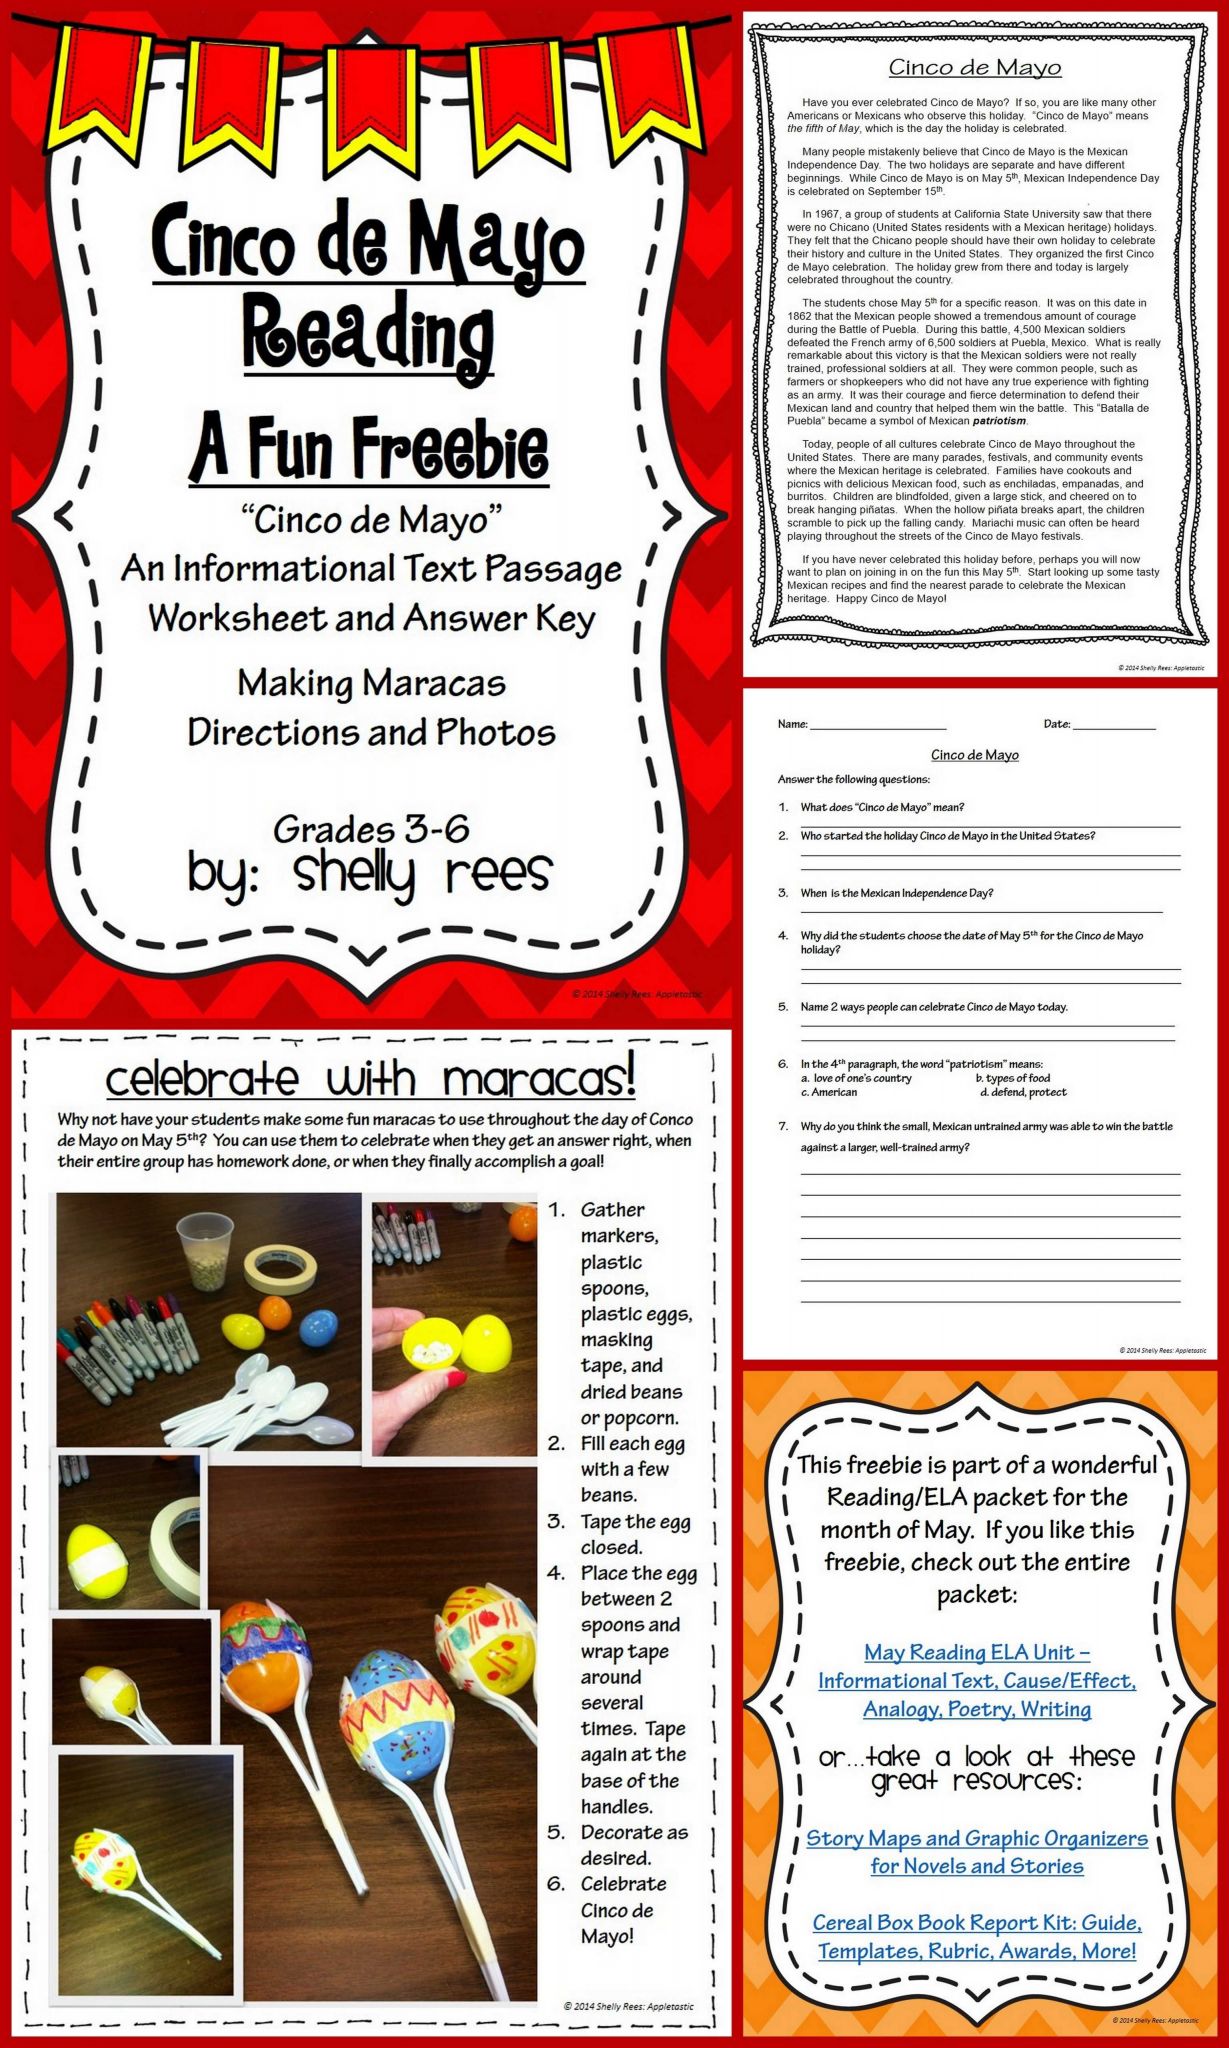 Guided Reading Activity 2 1 Economic Systems Worksheet Answers Along with Cinco De Mayo Prehension Worksheet